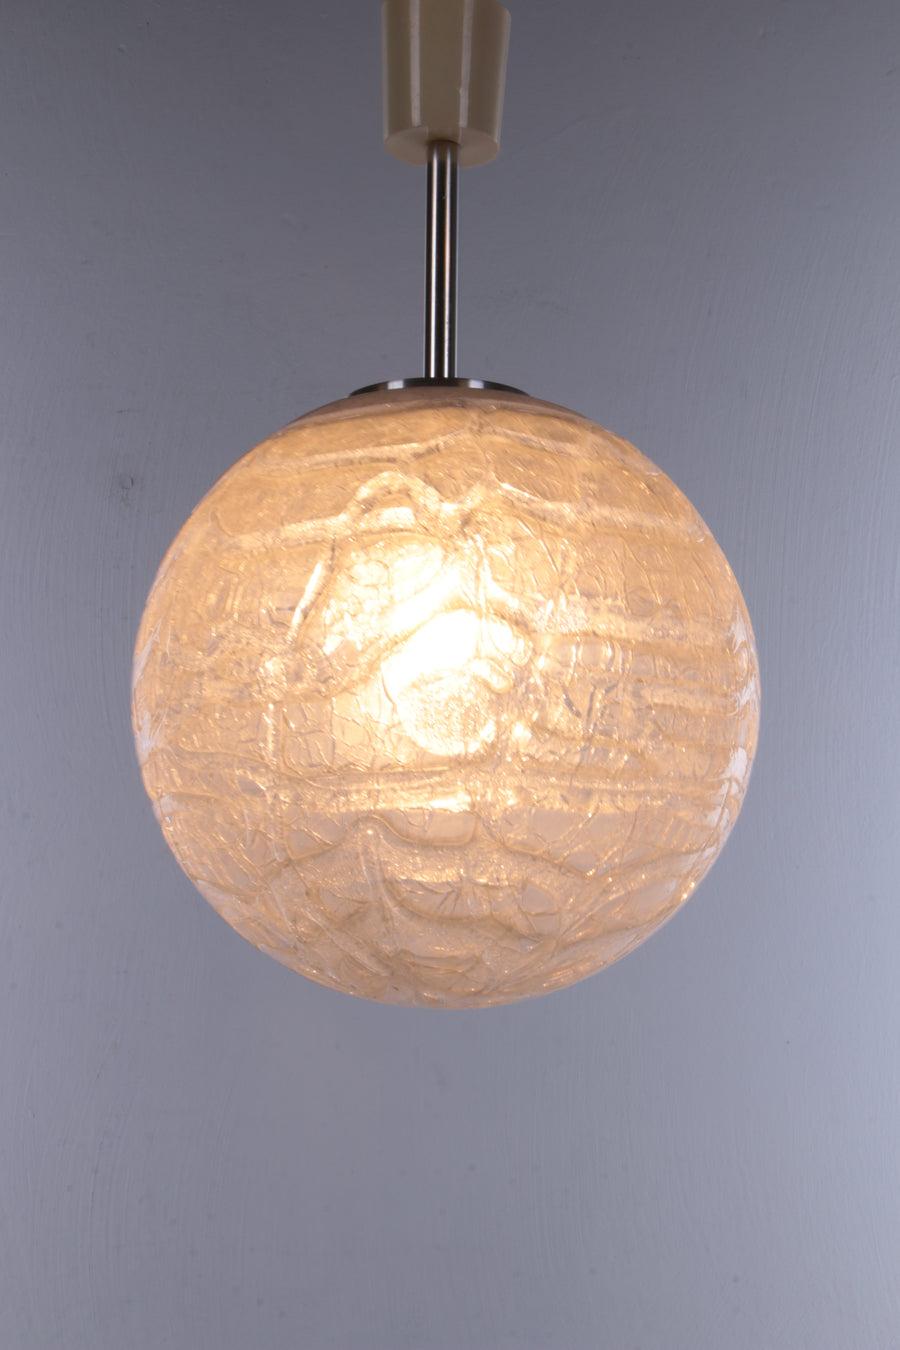 Glass Globe Pendant Lamp by Doria Leuchten

Beautiful stylish light object, fits perfectly in a sleek modern interior with plenty of daylight with some 'eye catchers' here and there, whether or not also in 'Ice Glass'.

Period: 1960s -70s
Brand: